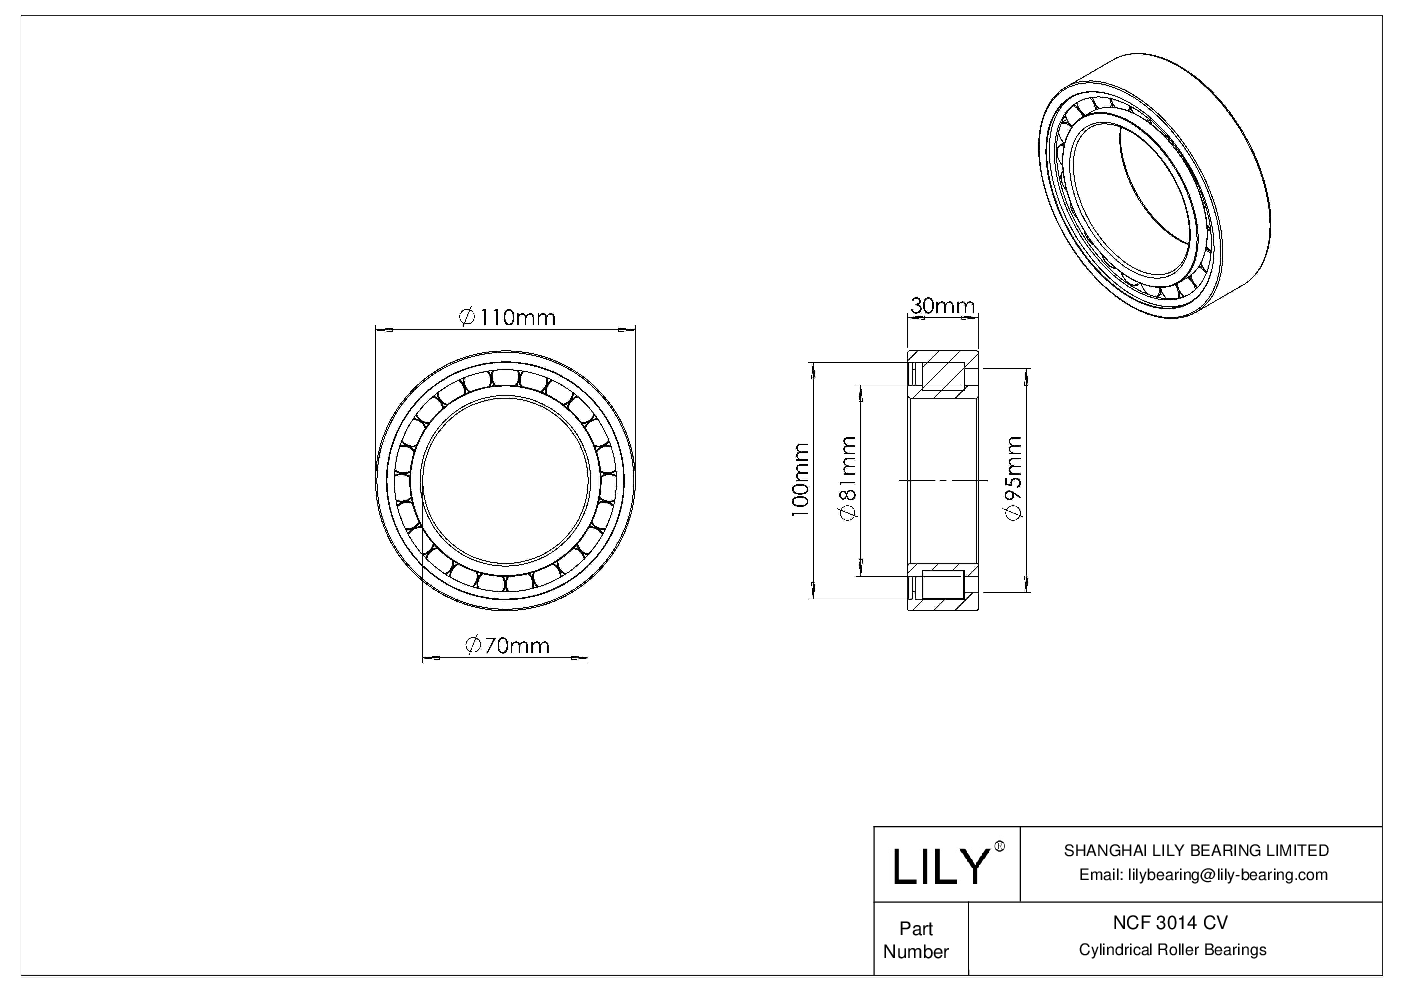 NCF 3014 CV Single Row Full Complement Cylindrical Roller Bearings cad drawing